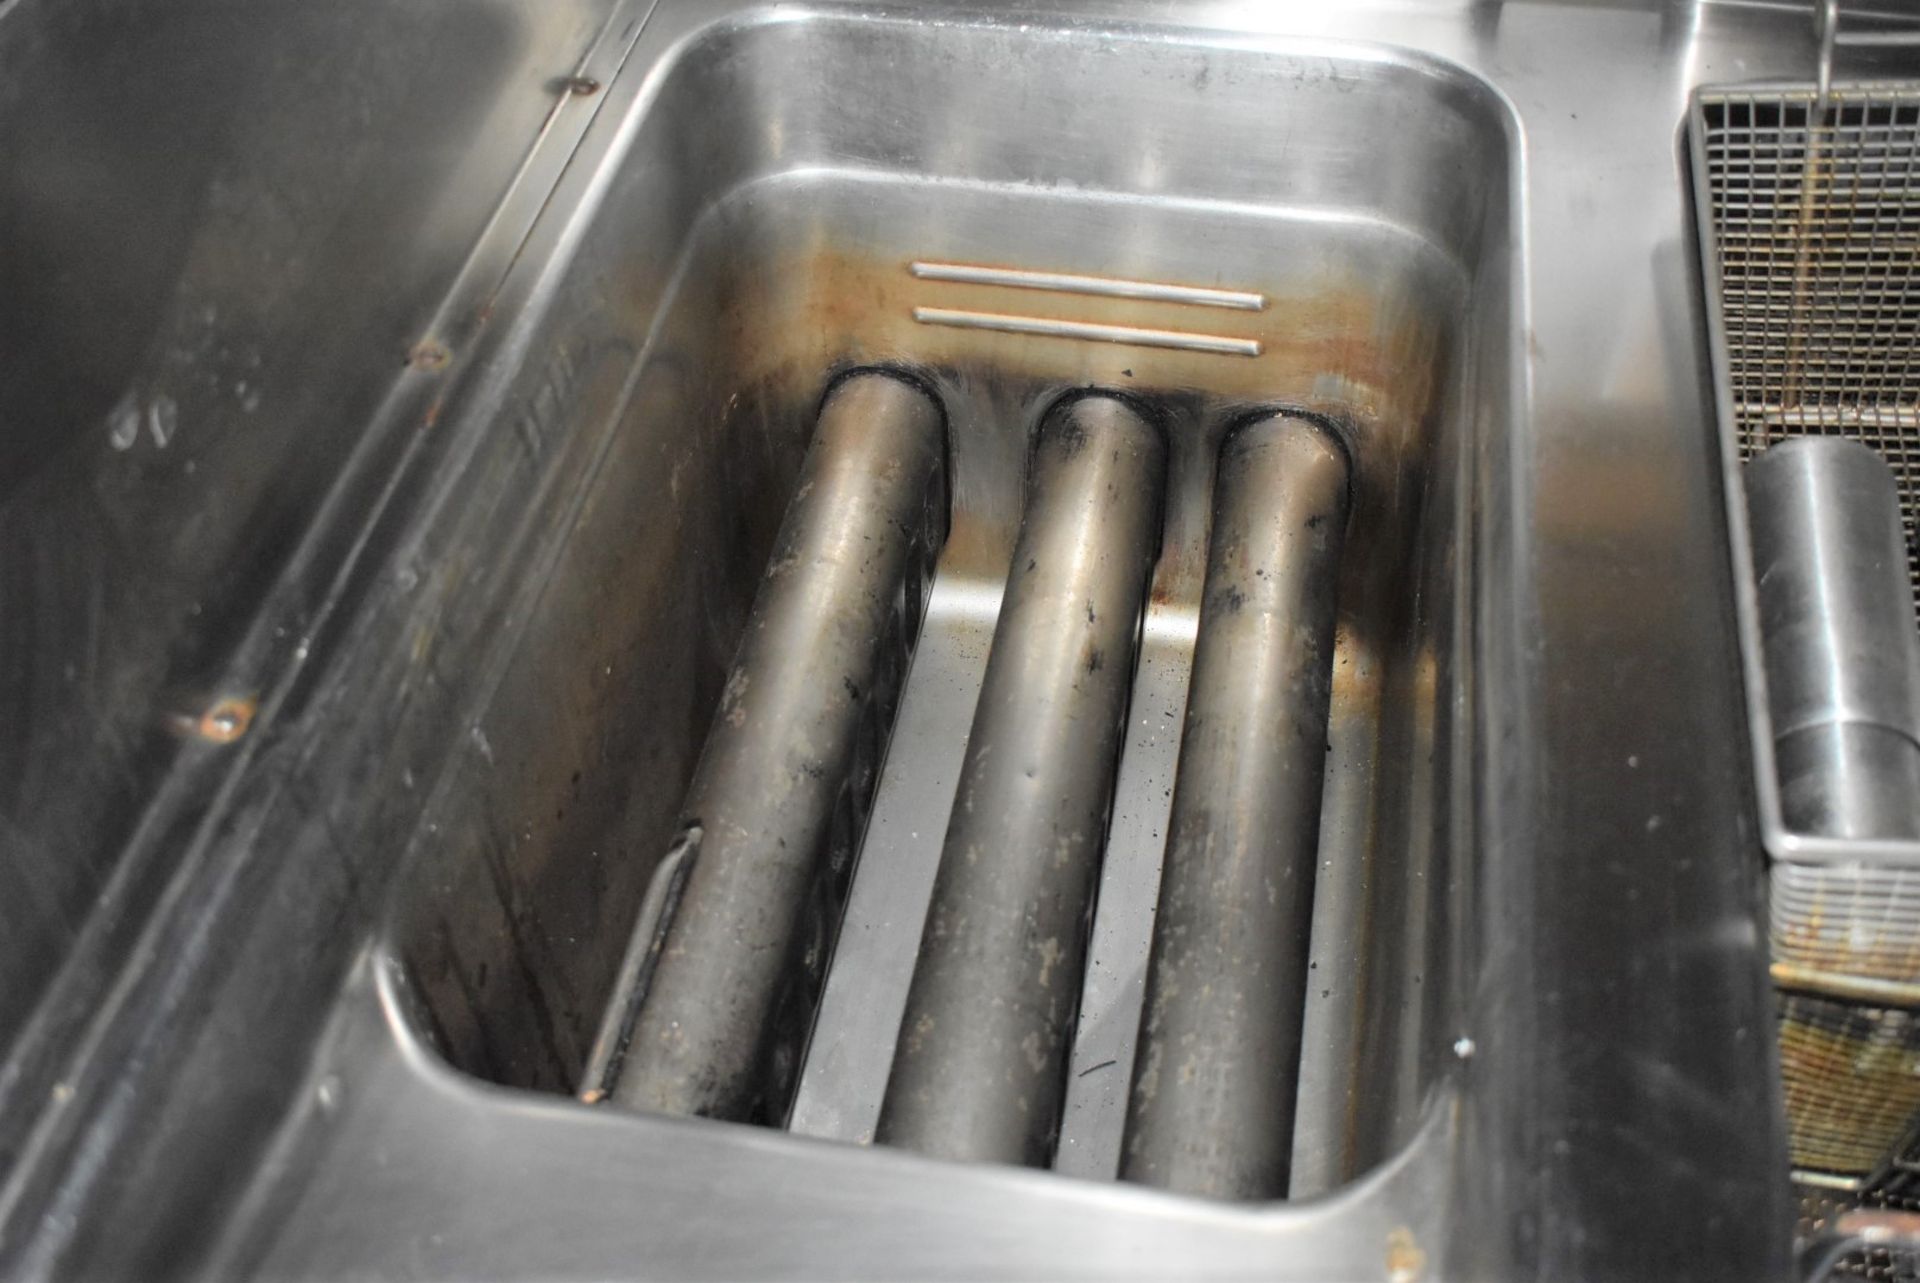 1 x Angelo Po Twin Tank Commercial Fryer - Includes Baskets - Removed From a Commercial Kitchen - Image 17 of 17